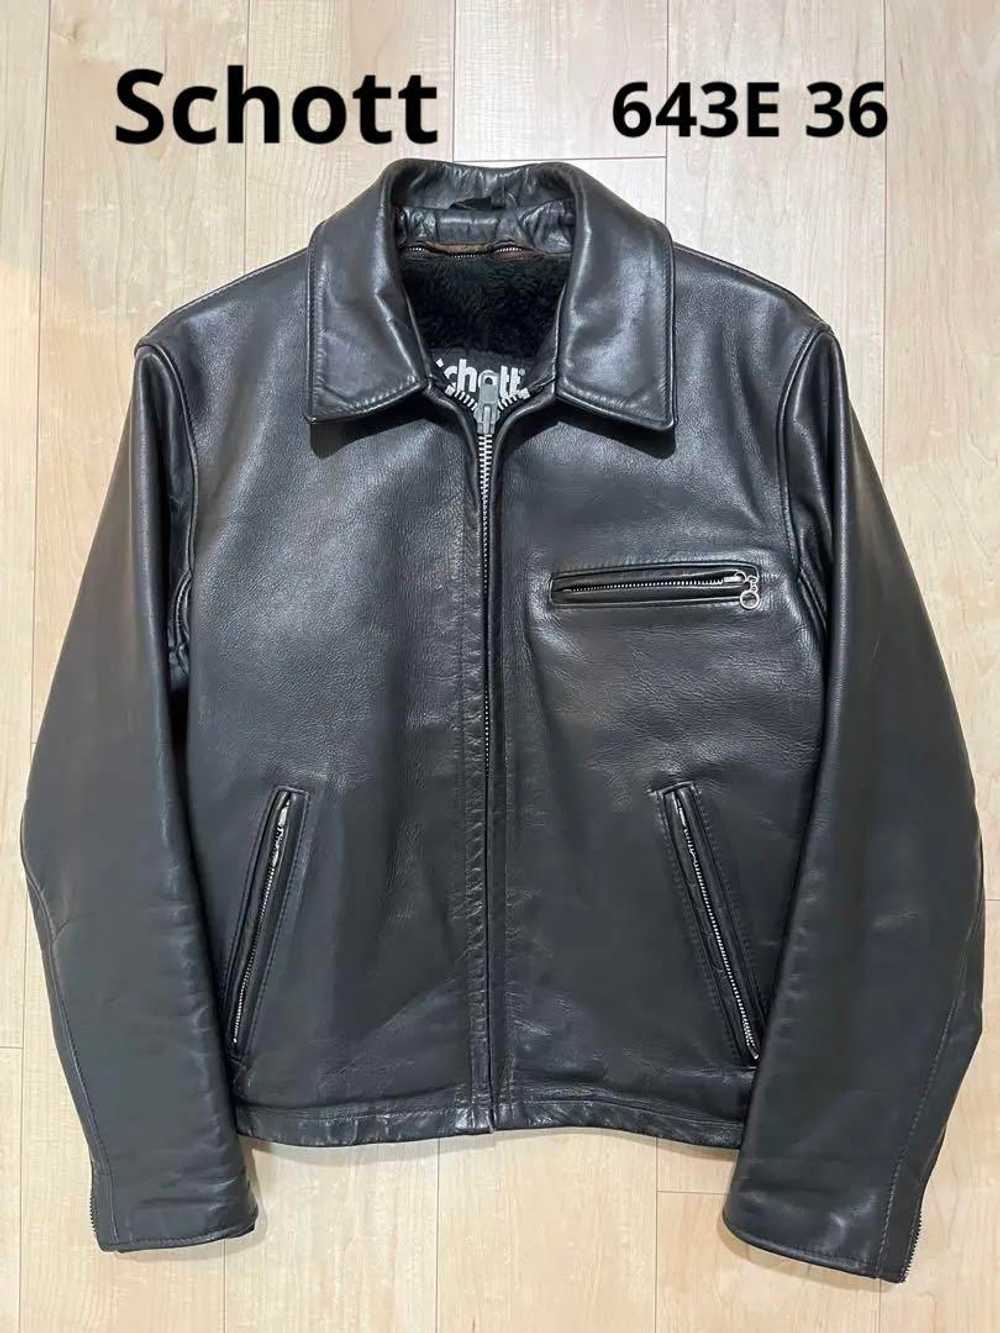 Schott 643E 36 Size Leather Jacket With Liner - image 1